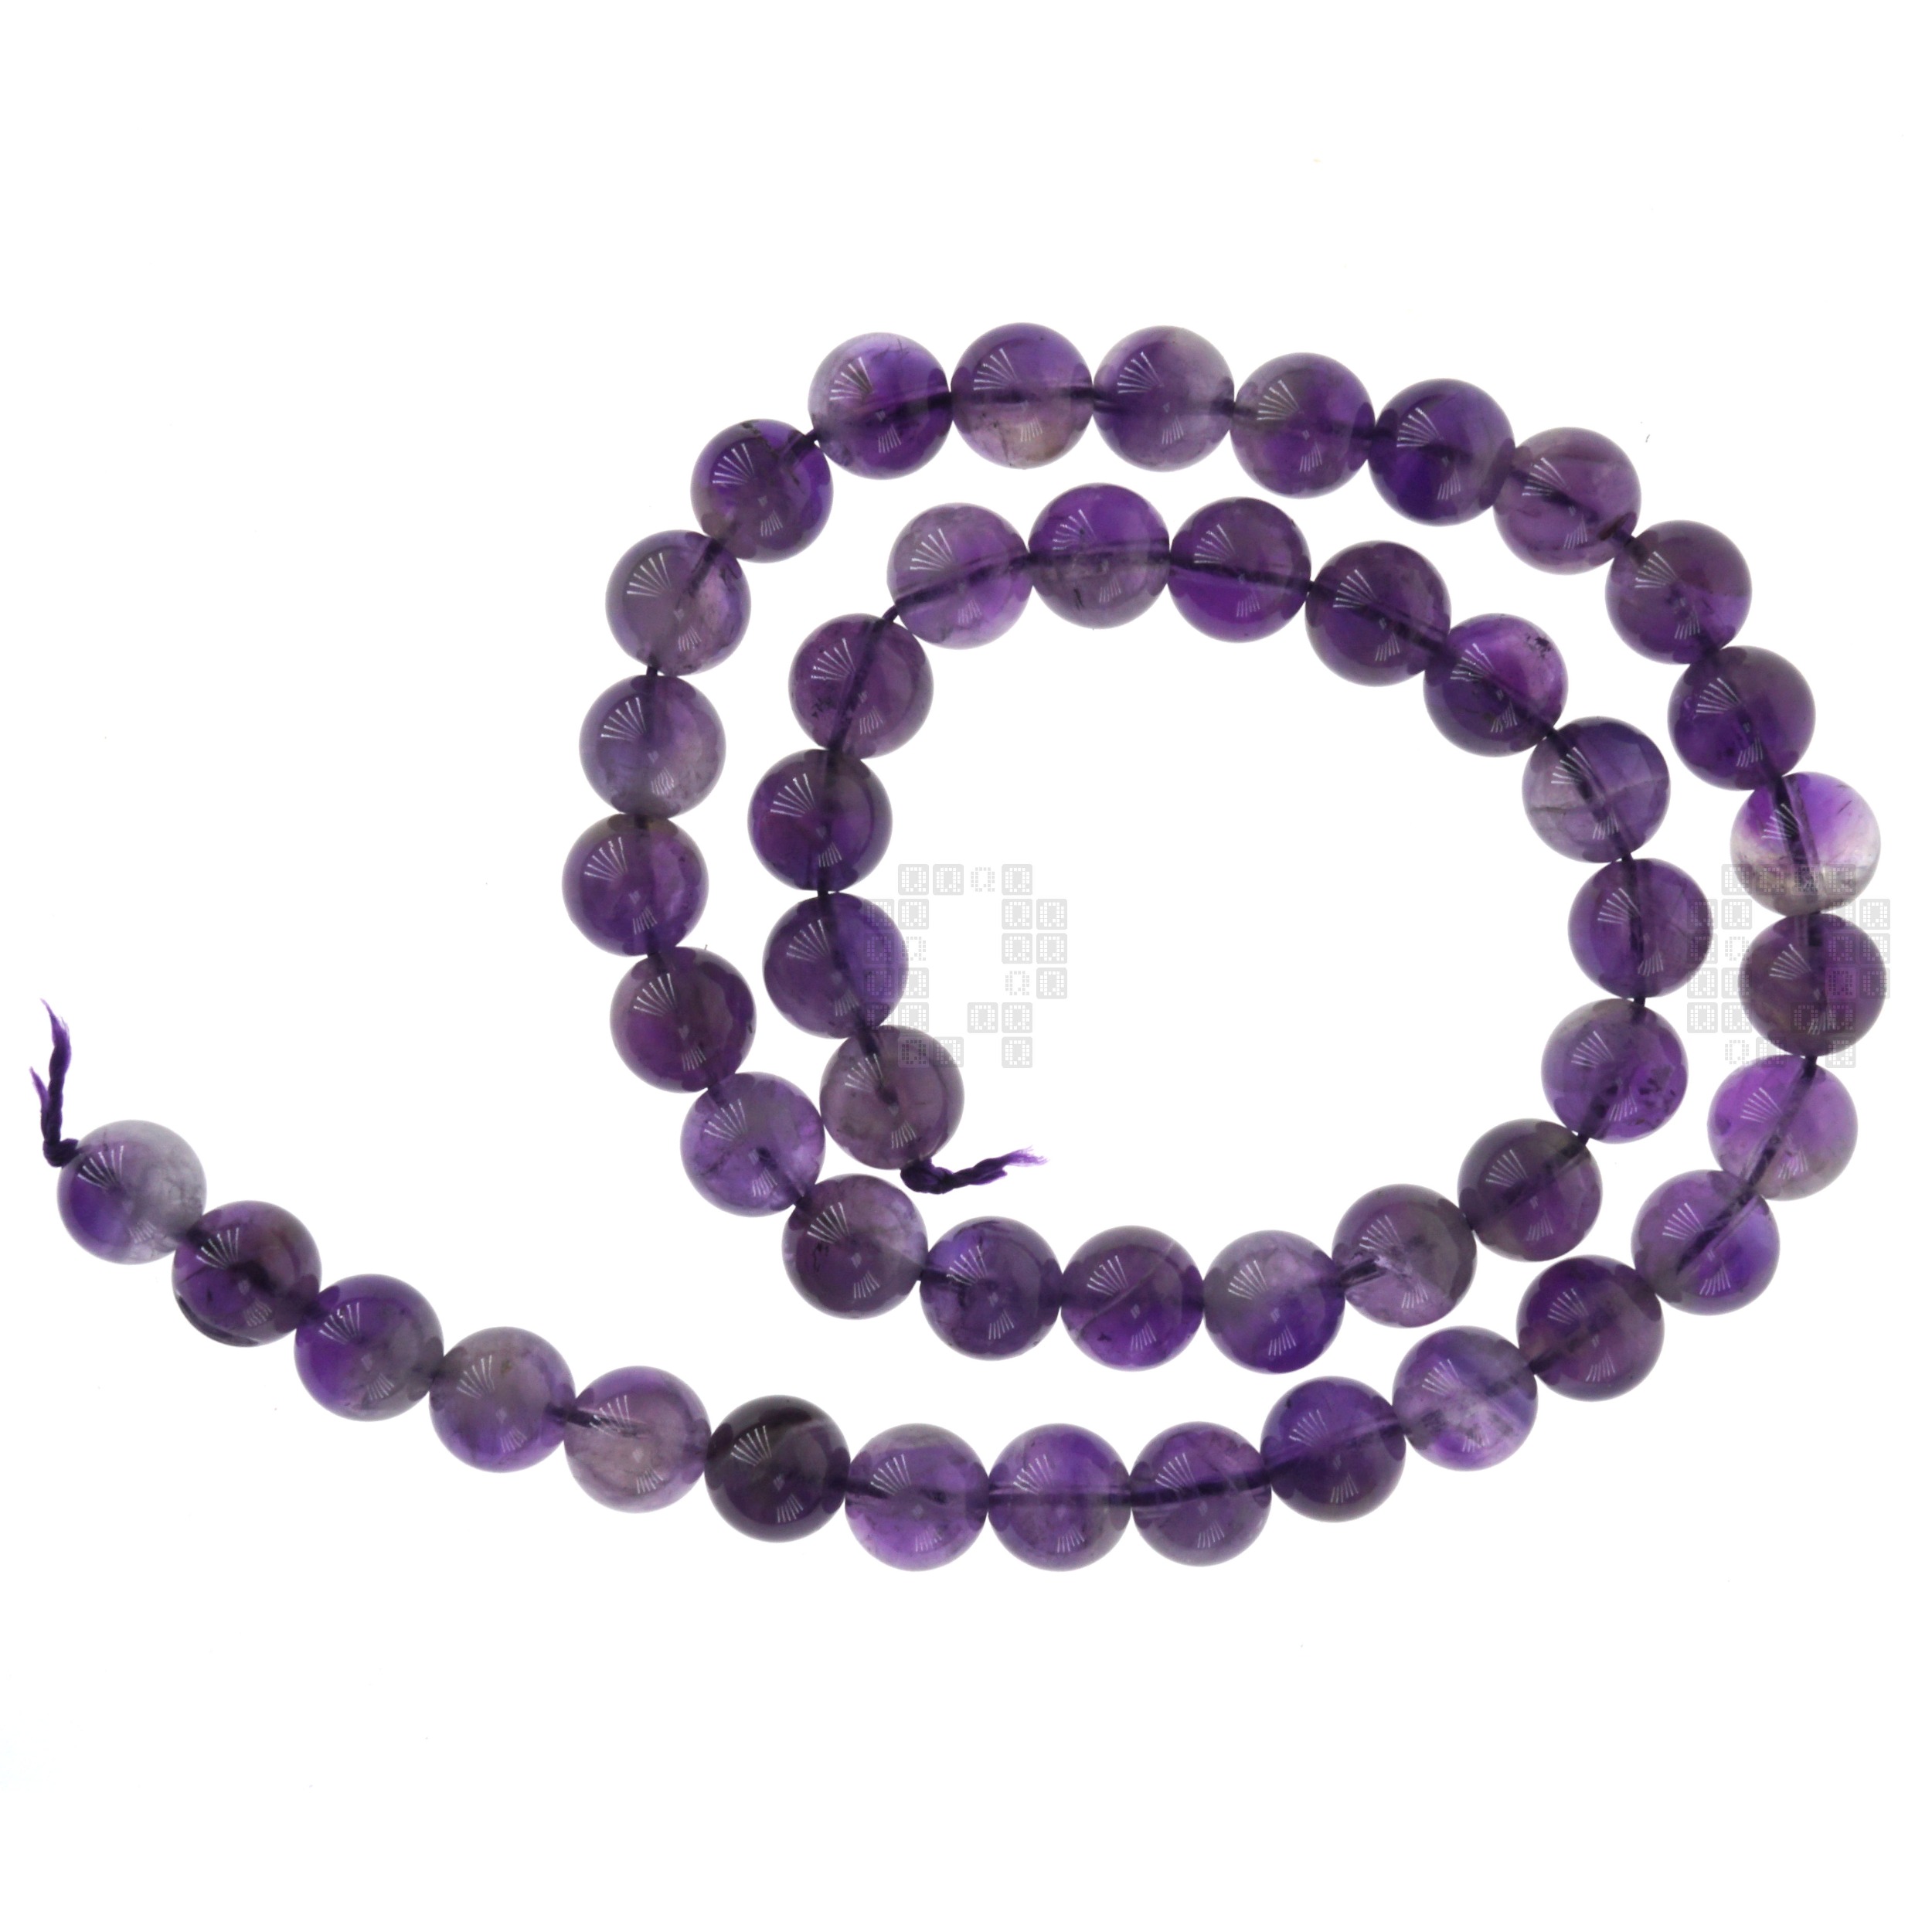 Amethyst 8mm Round Beads, 45 Pieces